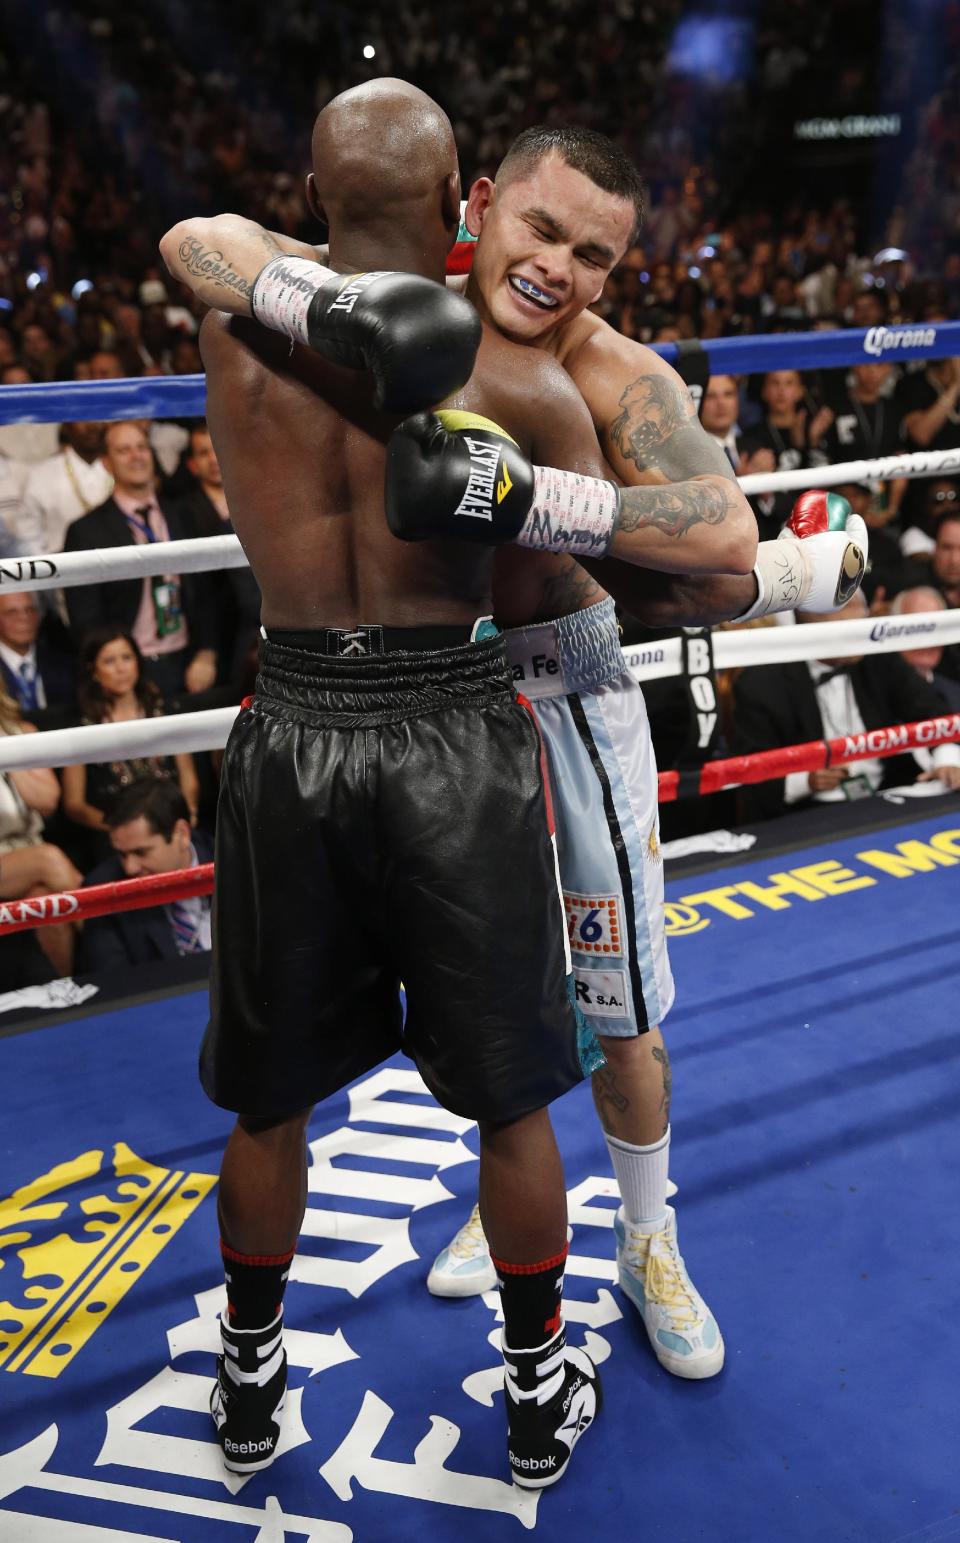 Floyd Mayweather Jr., left, and Marcos Maidana, from Argentina, embrace at the end of their WBC-WBA welterweight title boxing fight Saturday, May 3, 2014, in Las Vegas. Mayweather won by majority decision. (AP Photo/Eric Jamison)